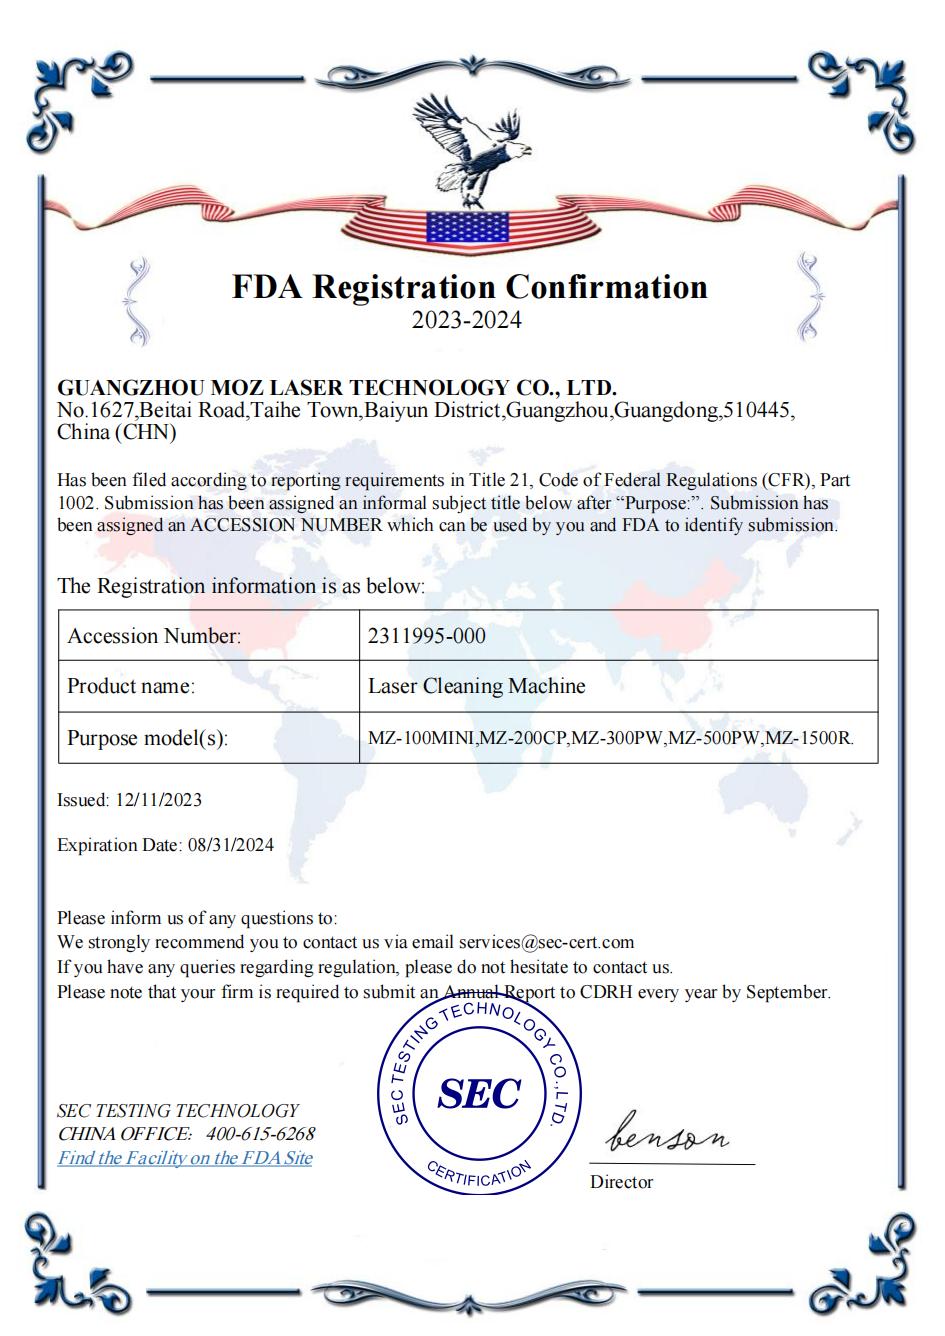 FDA certification of laser cleaning machines